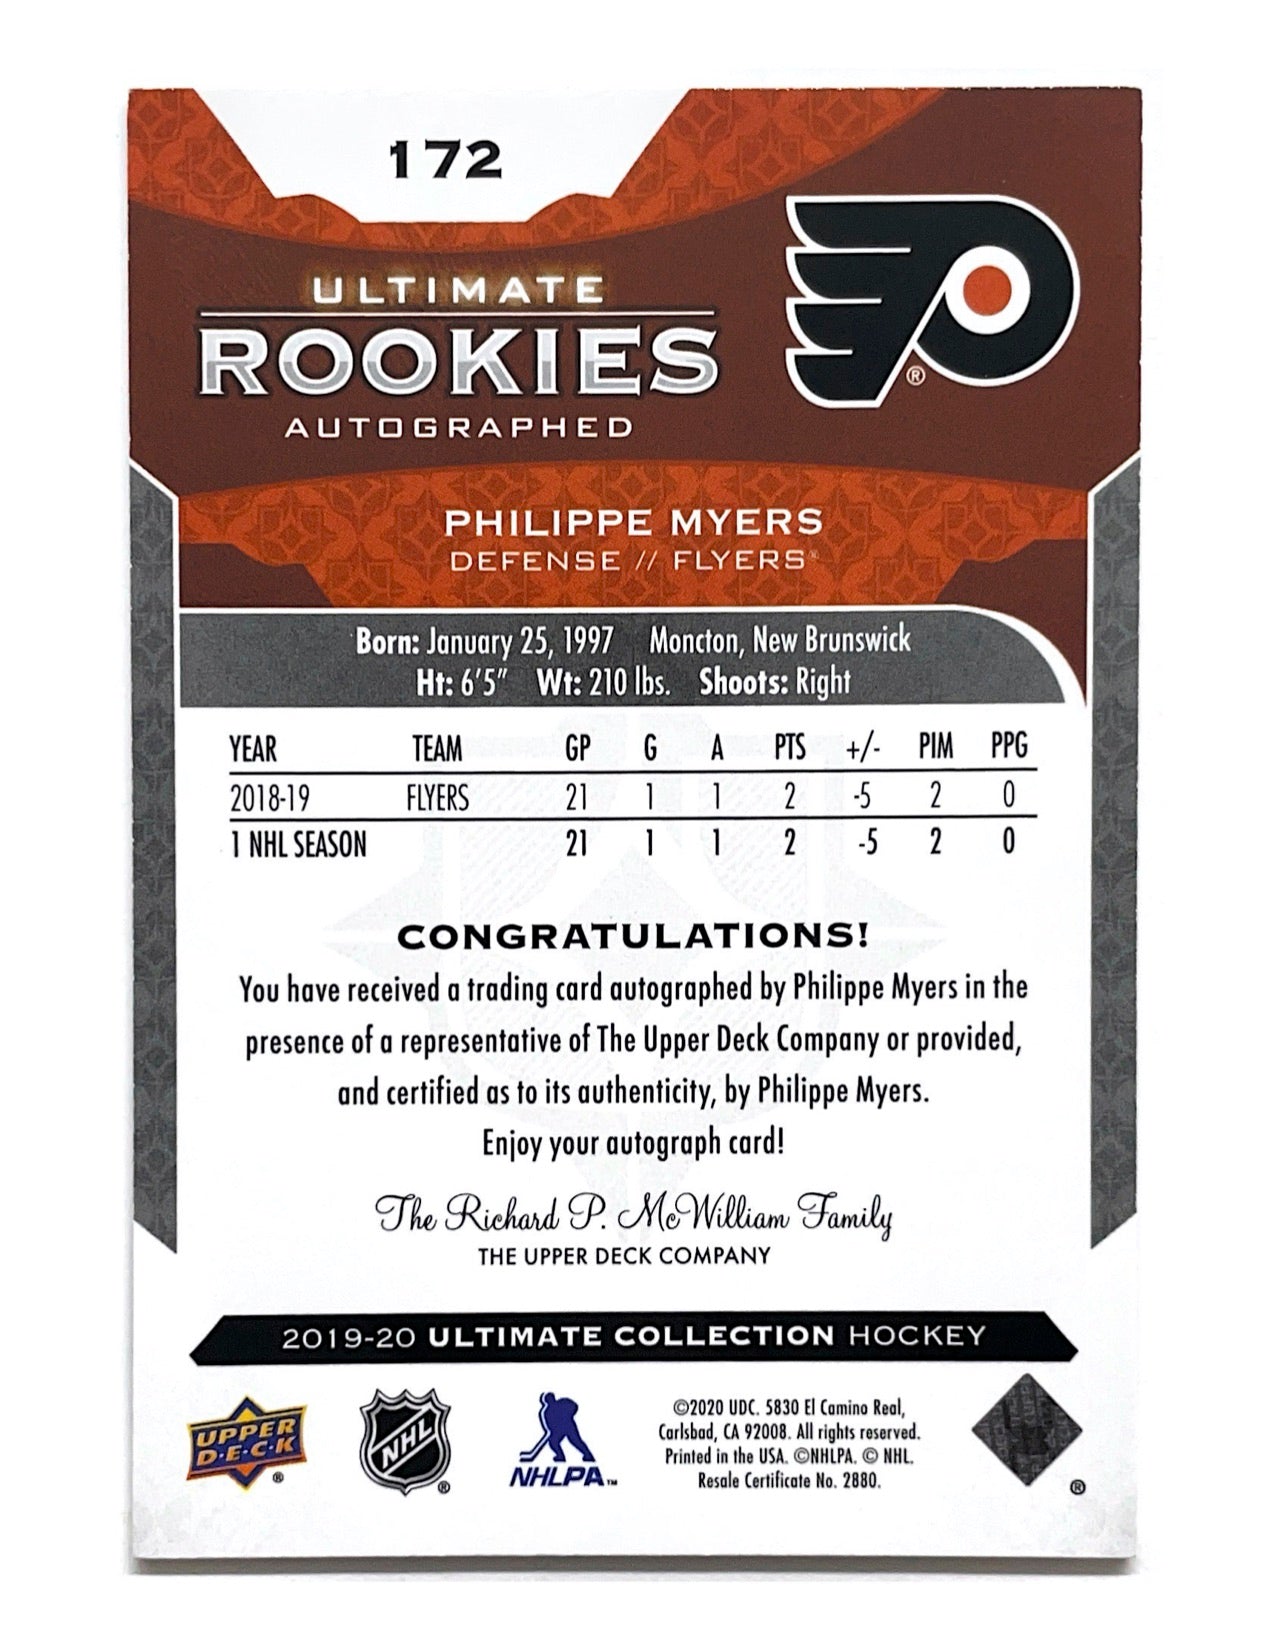 Philippe Myers 2020-21 Upper Deck Ultimate Collection Ultimate Rookies Autographed Update #172 - 054/299